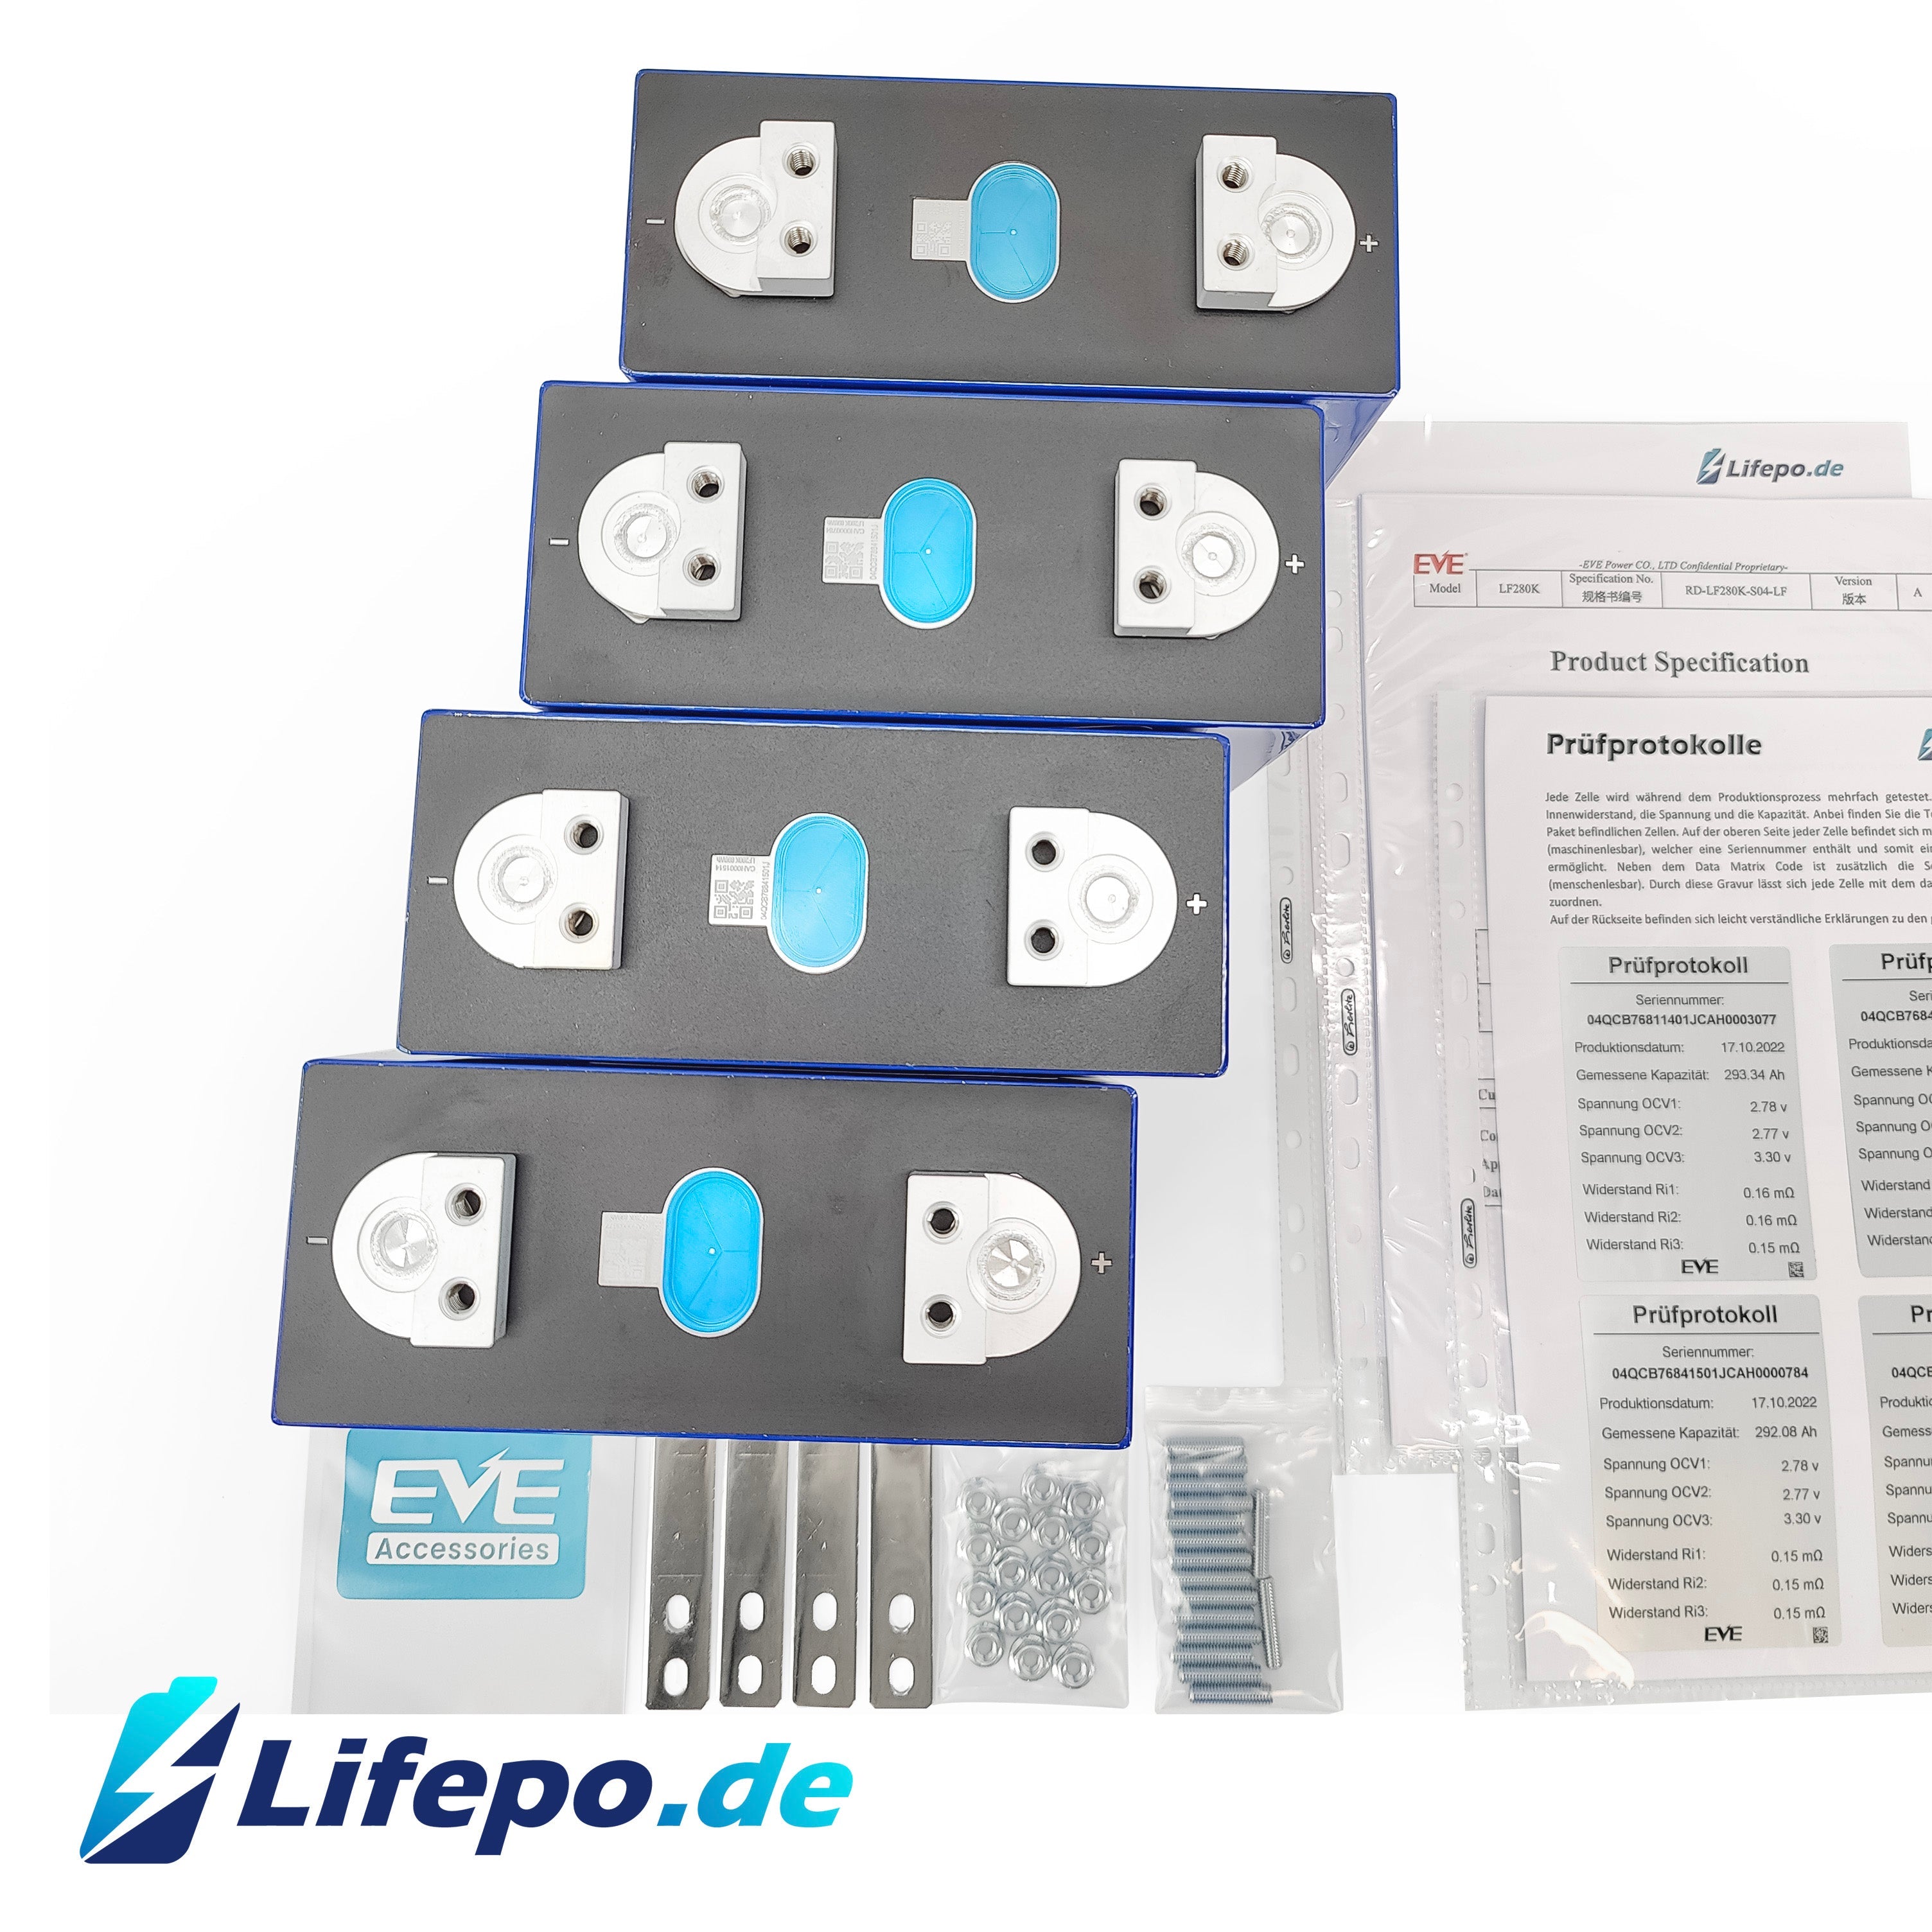 0% VAT 12v 280Ah Lifepo4 battery system with EVE Grade A+ 3.8kWh –